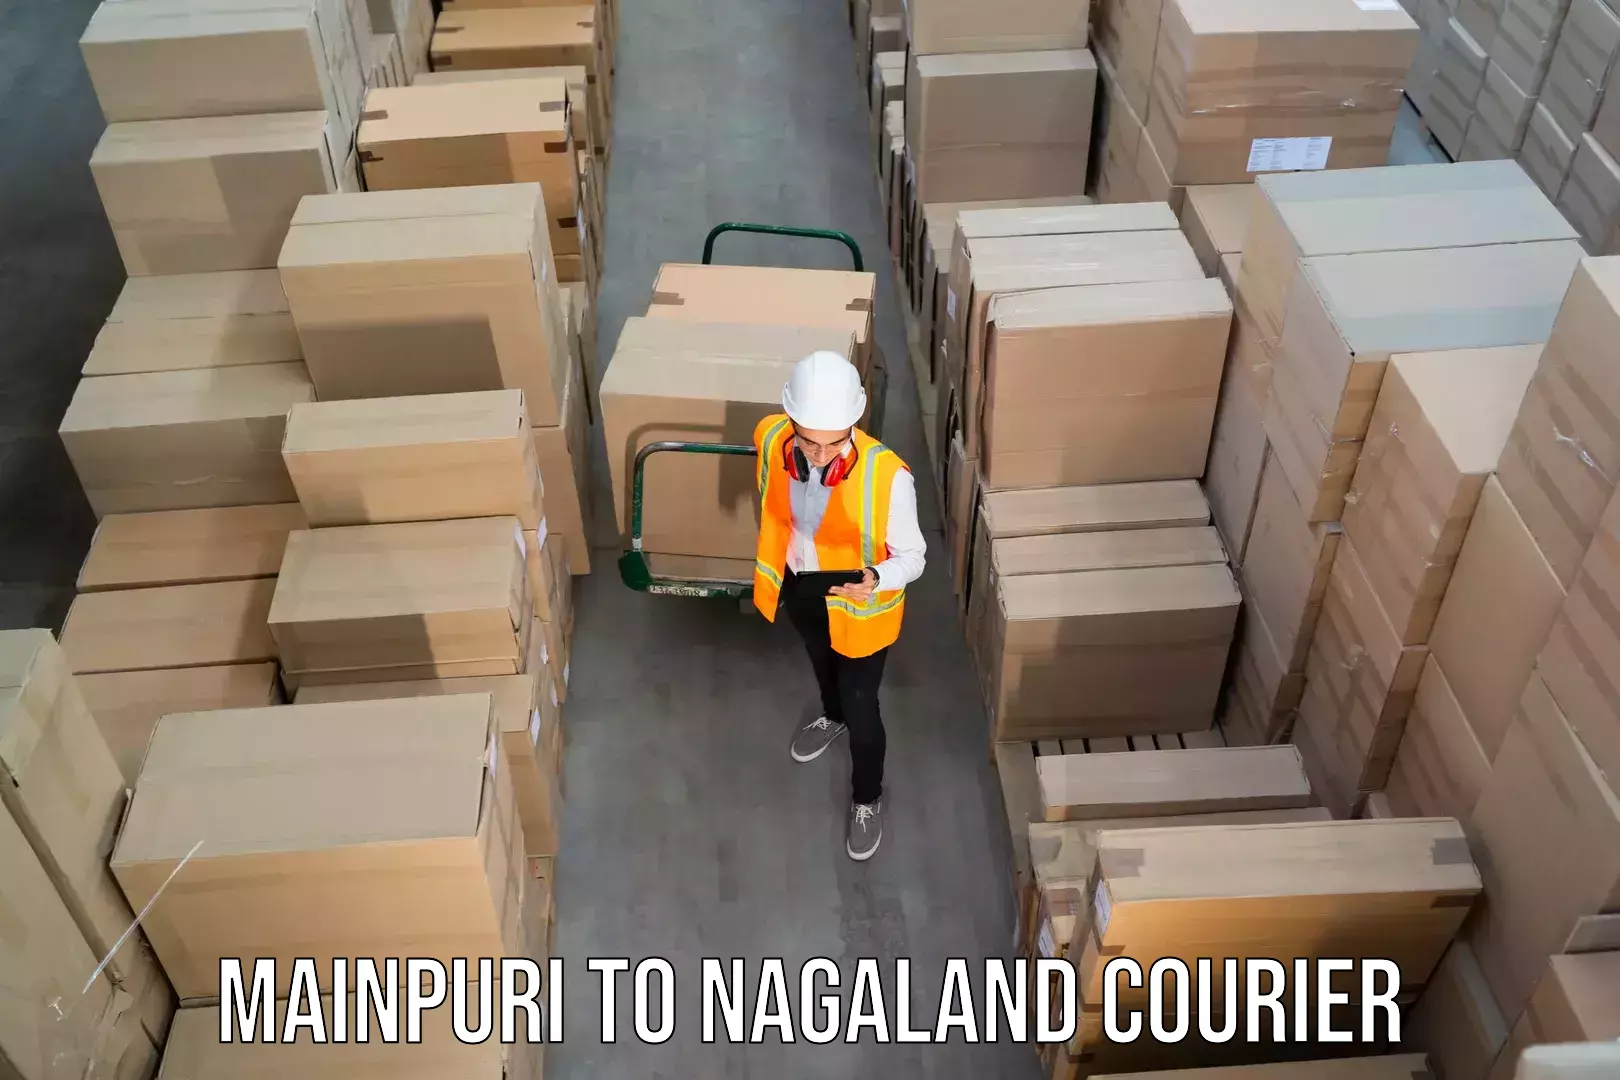 Reliable delivery network Mainpuri to Mokokchung